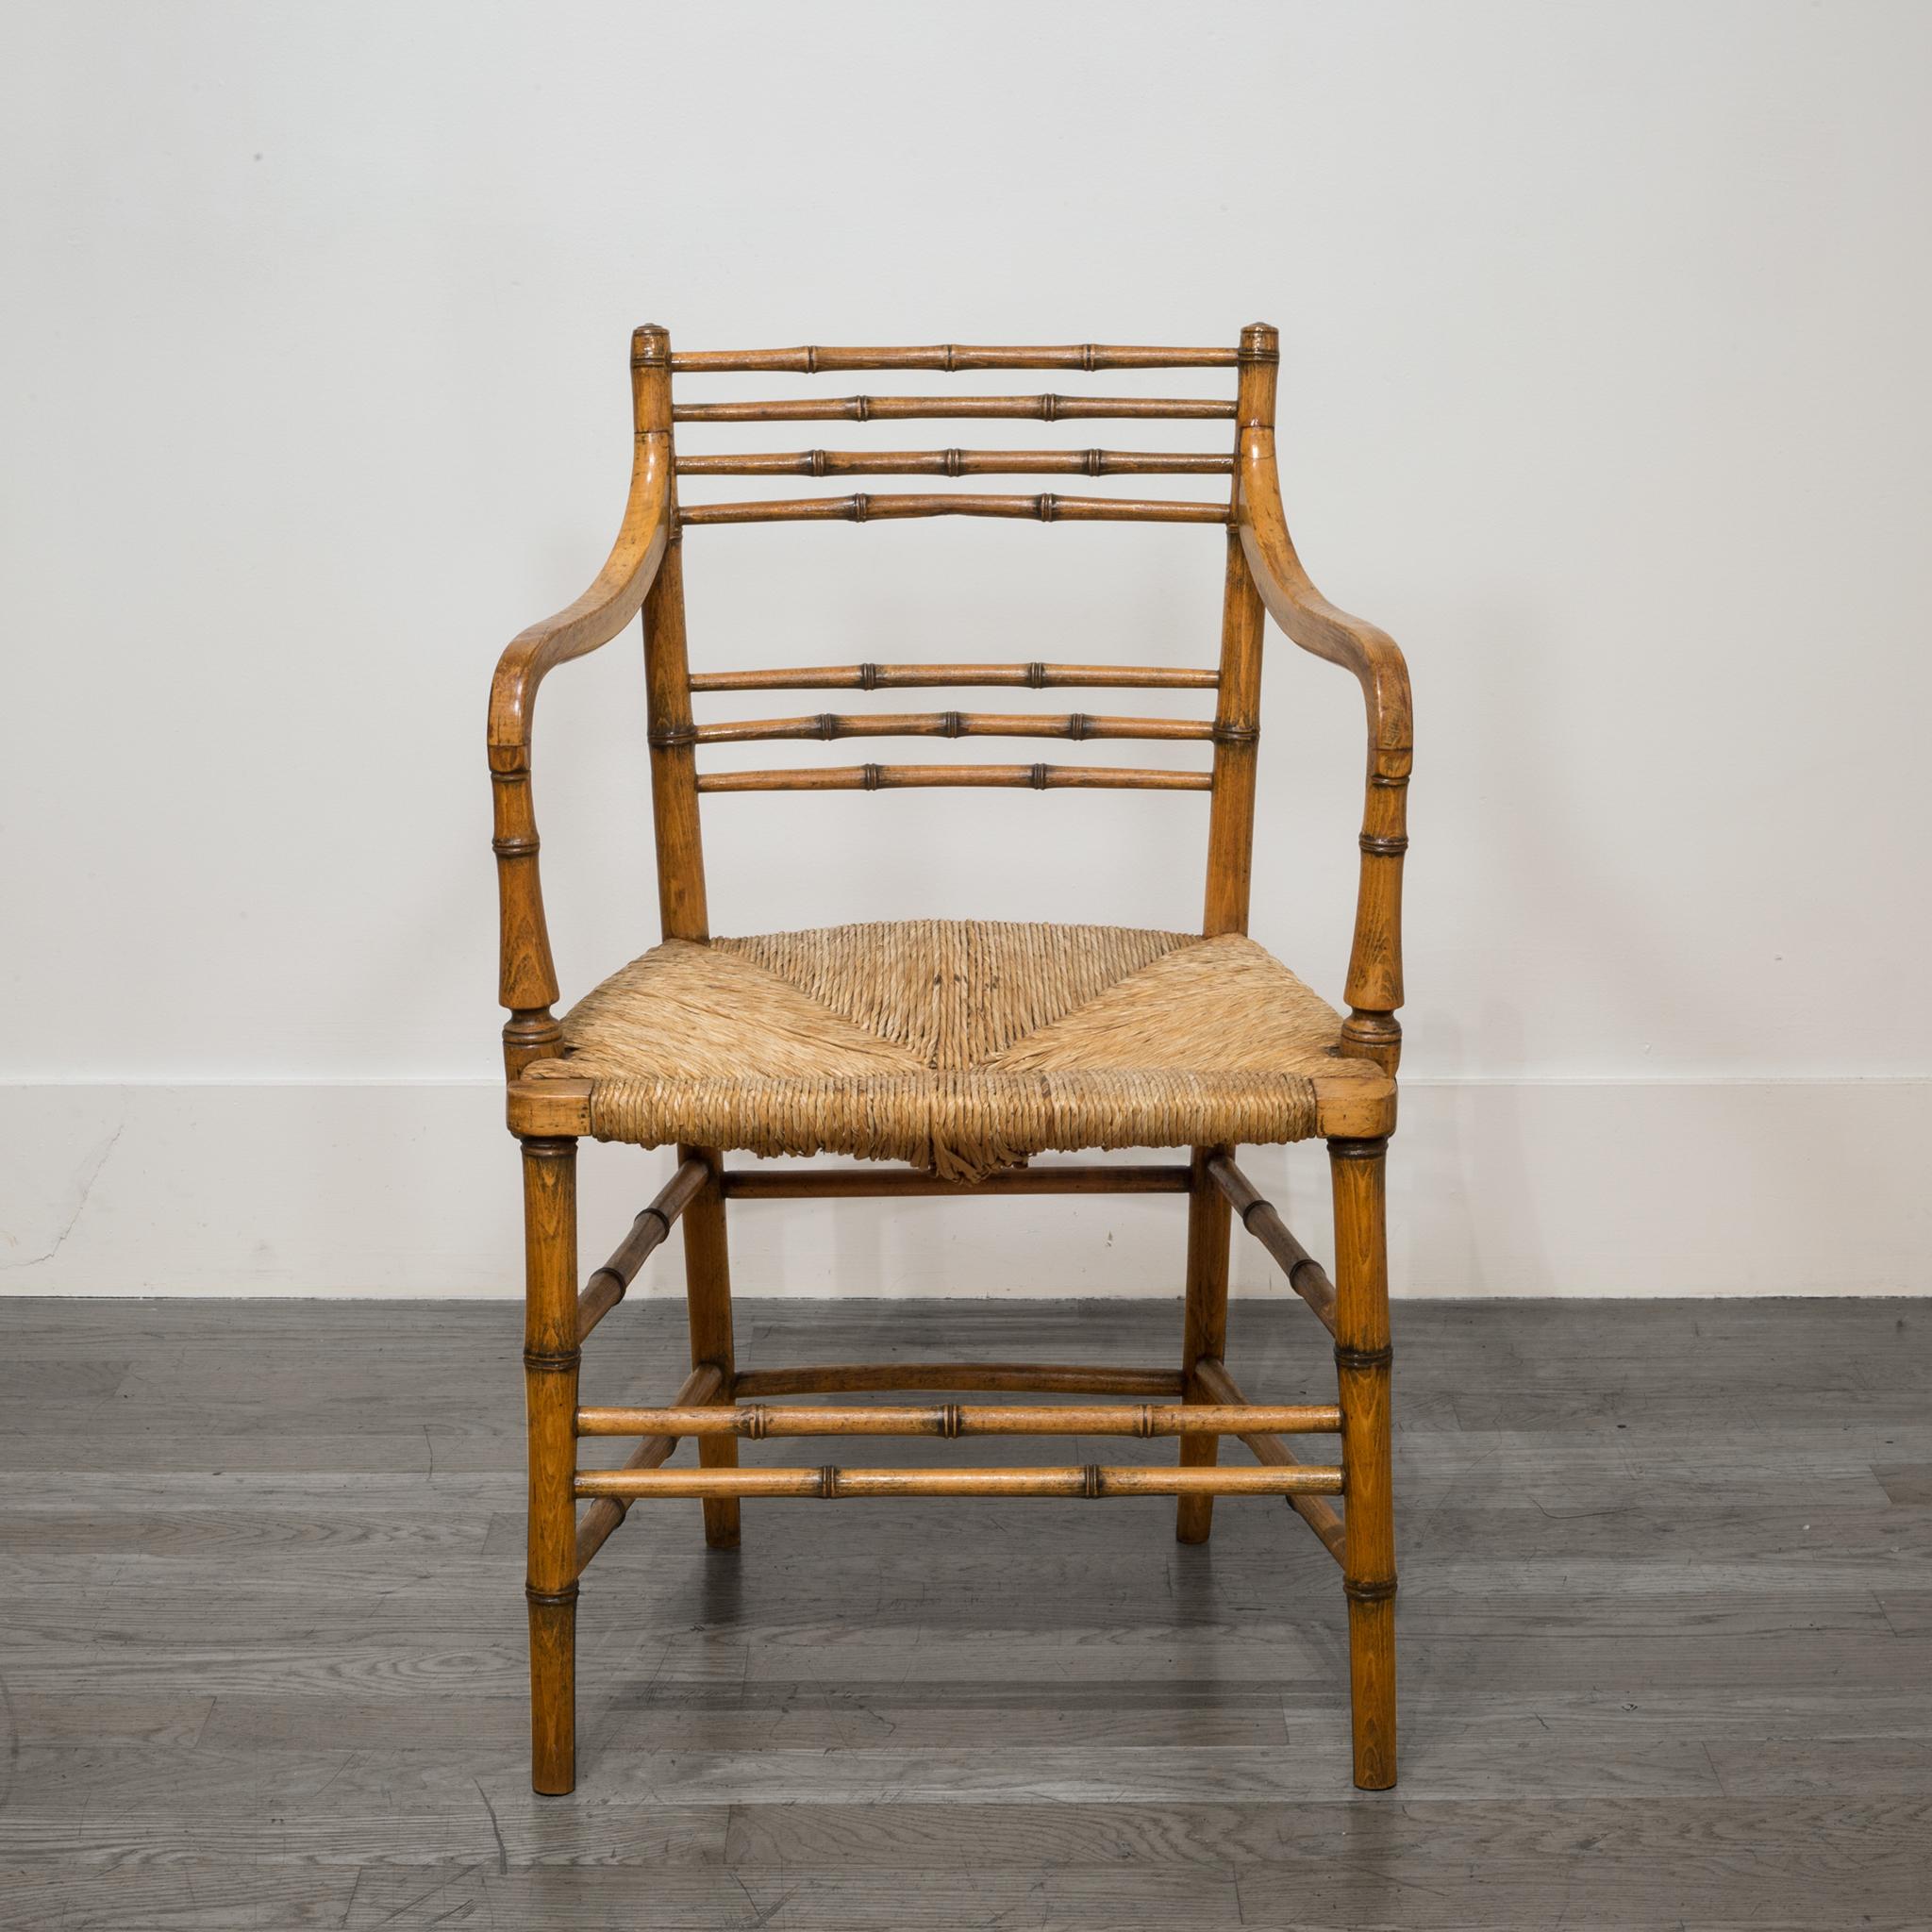 Faux bamboo Regency armchair made of beechwood with the original rush seat.